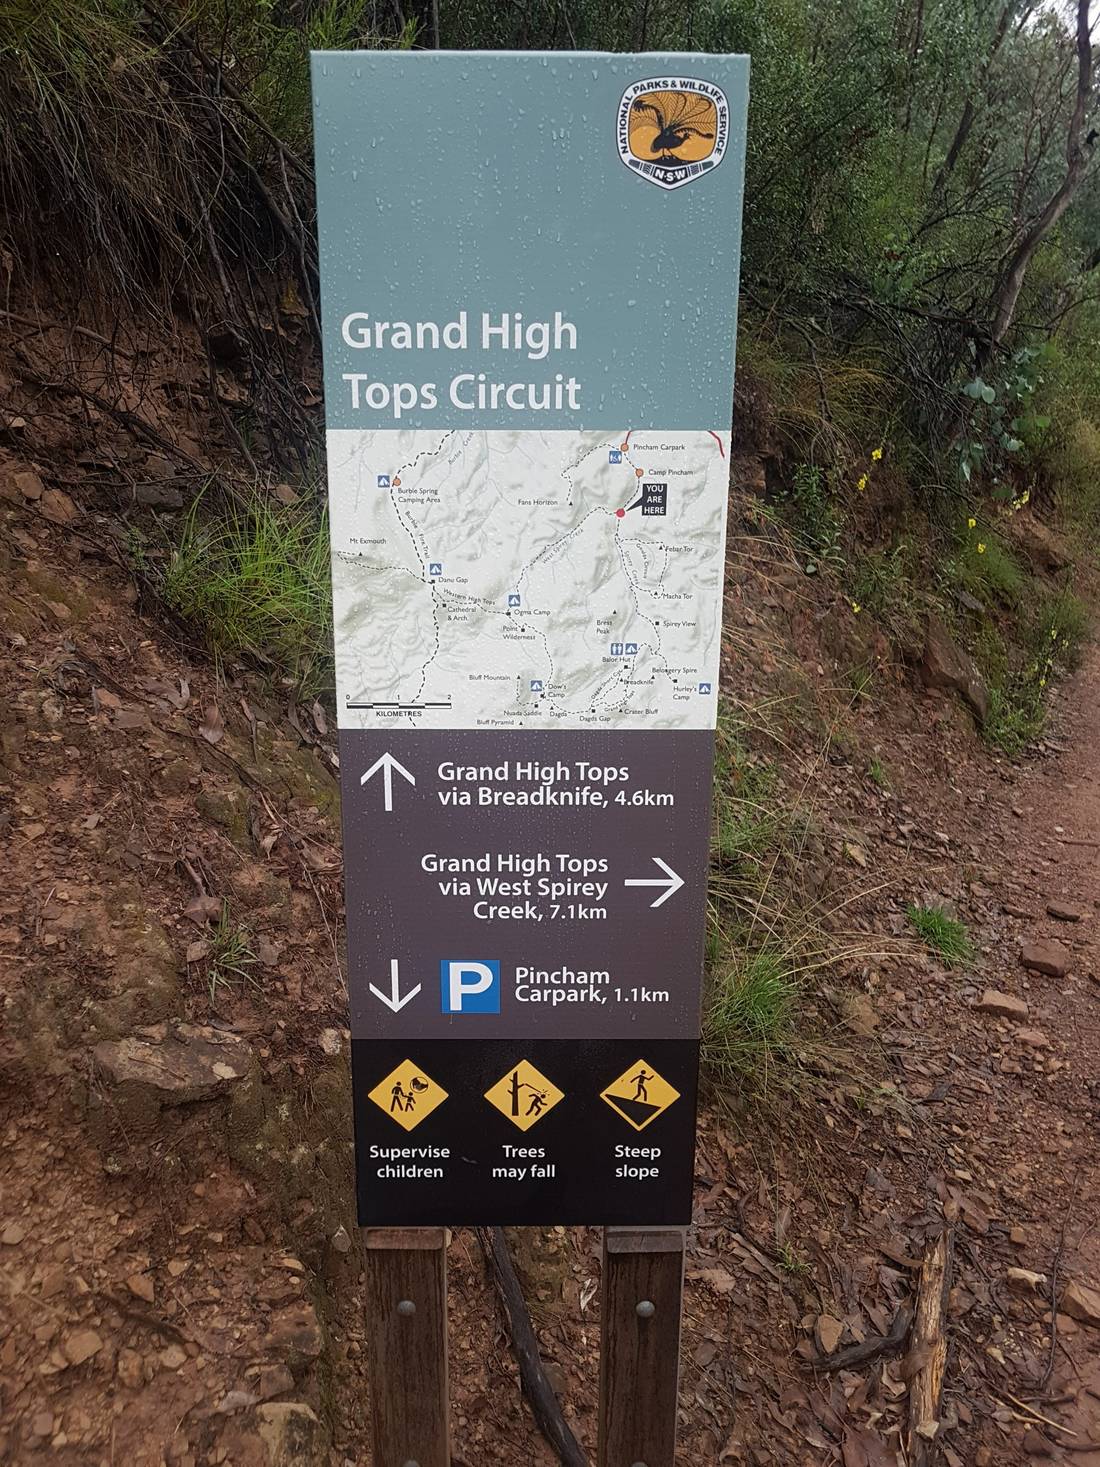 So, after a good night’s sleep we were back to try one of the most famous short hikes in Australia, one that we knew only as ”Breadknife”.